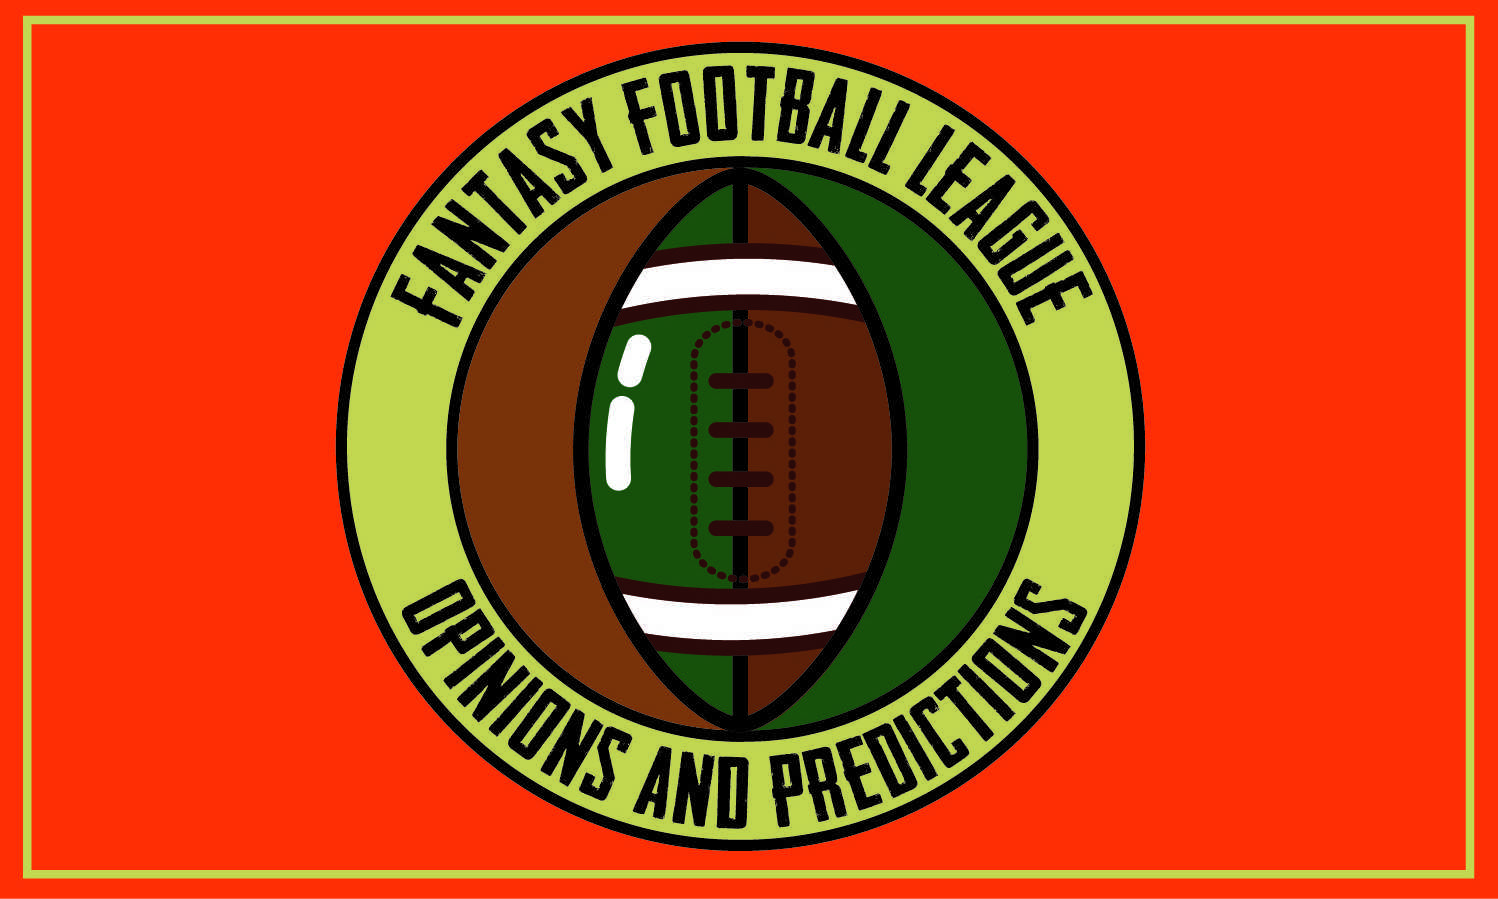 Illustration of Football logo with the text" Fantasy Football League, Opinion and Predictions" behind it